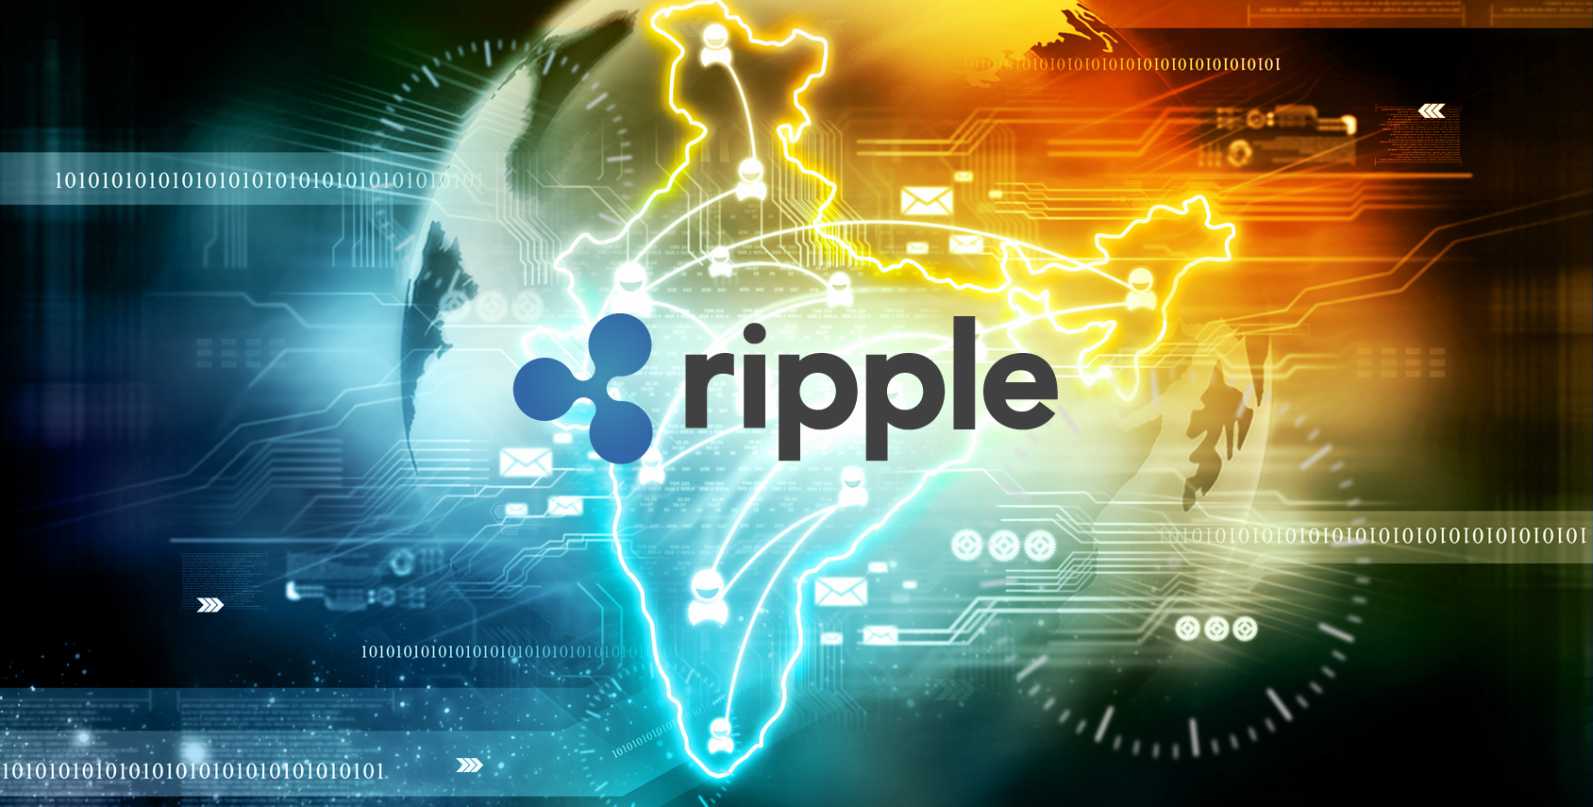 How Much Did Xrp Go Up In 2017 - Ripple Explained Chapter 5 Facts And Figures About Ripple Investerest / So xrp price will never go up?!